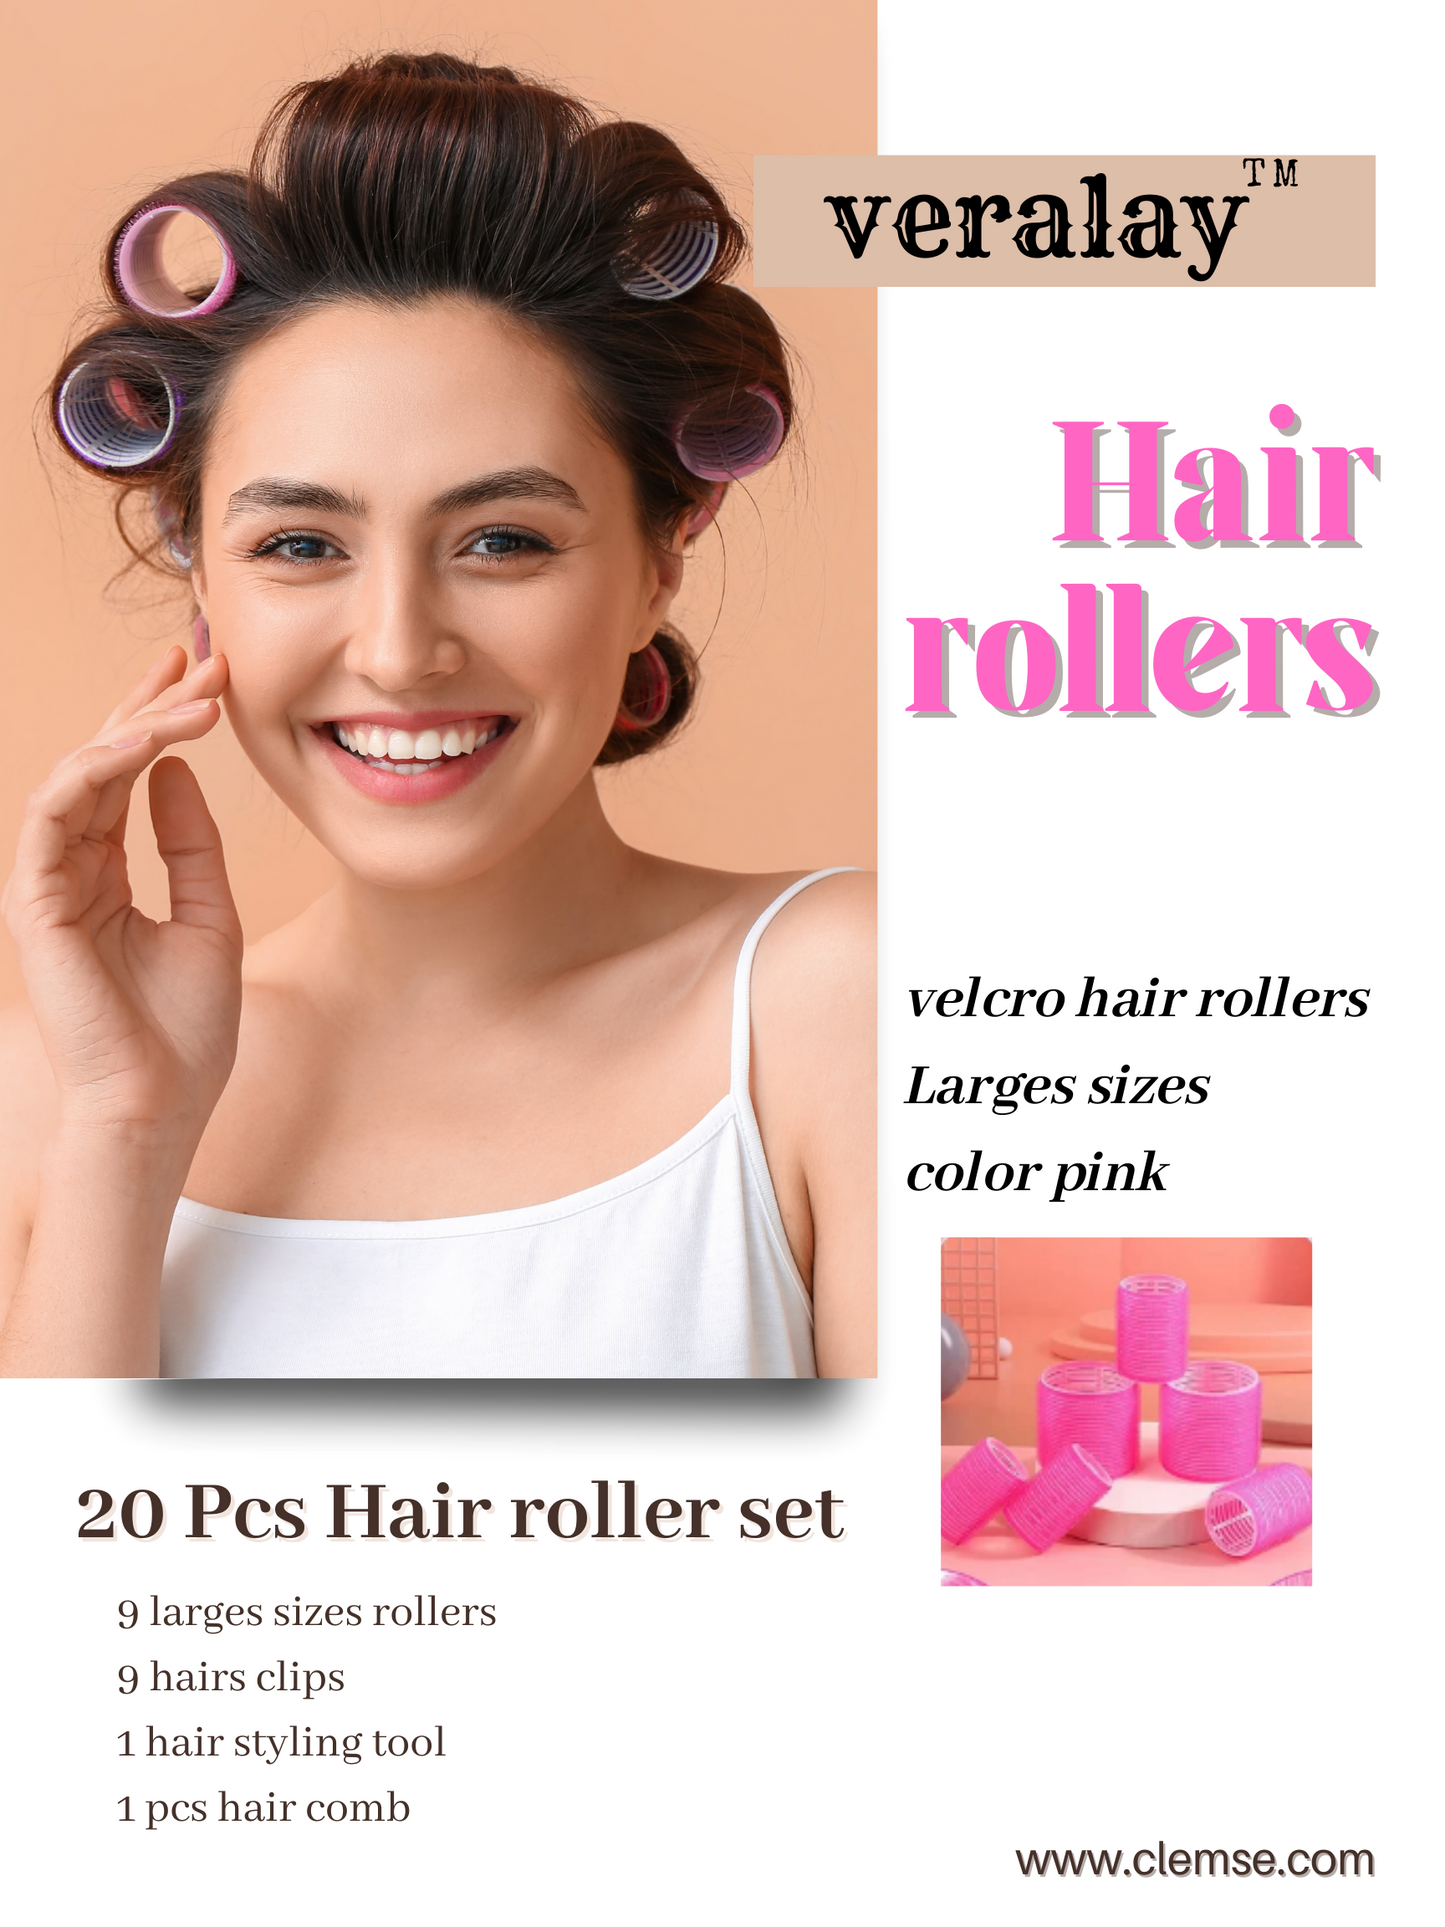 Velcro Rollers for Hair, 20Pcs Hair Rollers for Volume, Large Rollers Hair Curlers for Long Medium Short Thick Fine Thin Hair Bangs Self Grip Heatless Hair Curler 1 Size Hair Roller Set